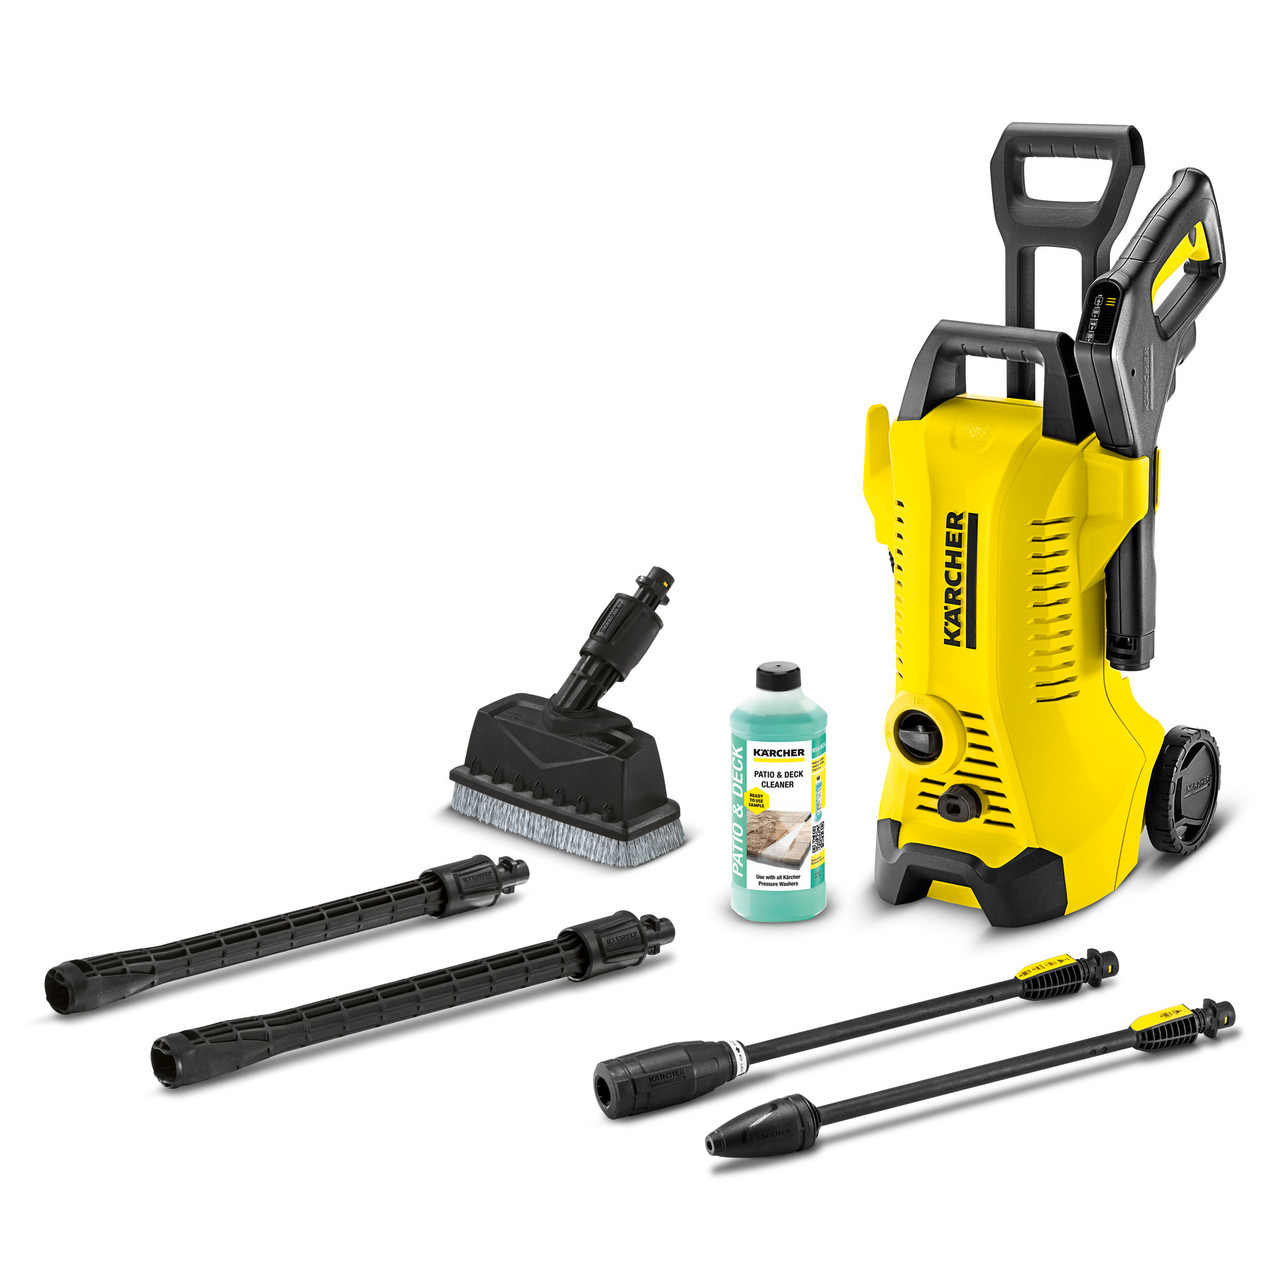 Karcher K3 Full Control Pressure Washer with Deck Power Scrubber 1.602-610.0 